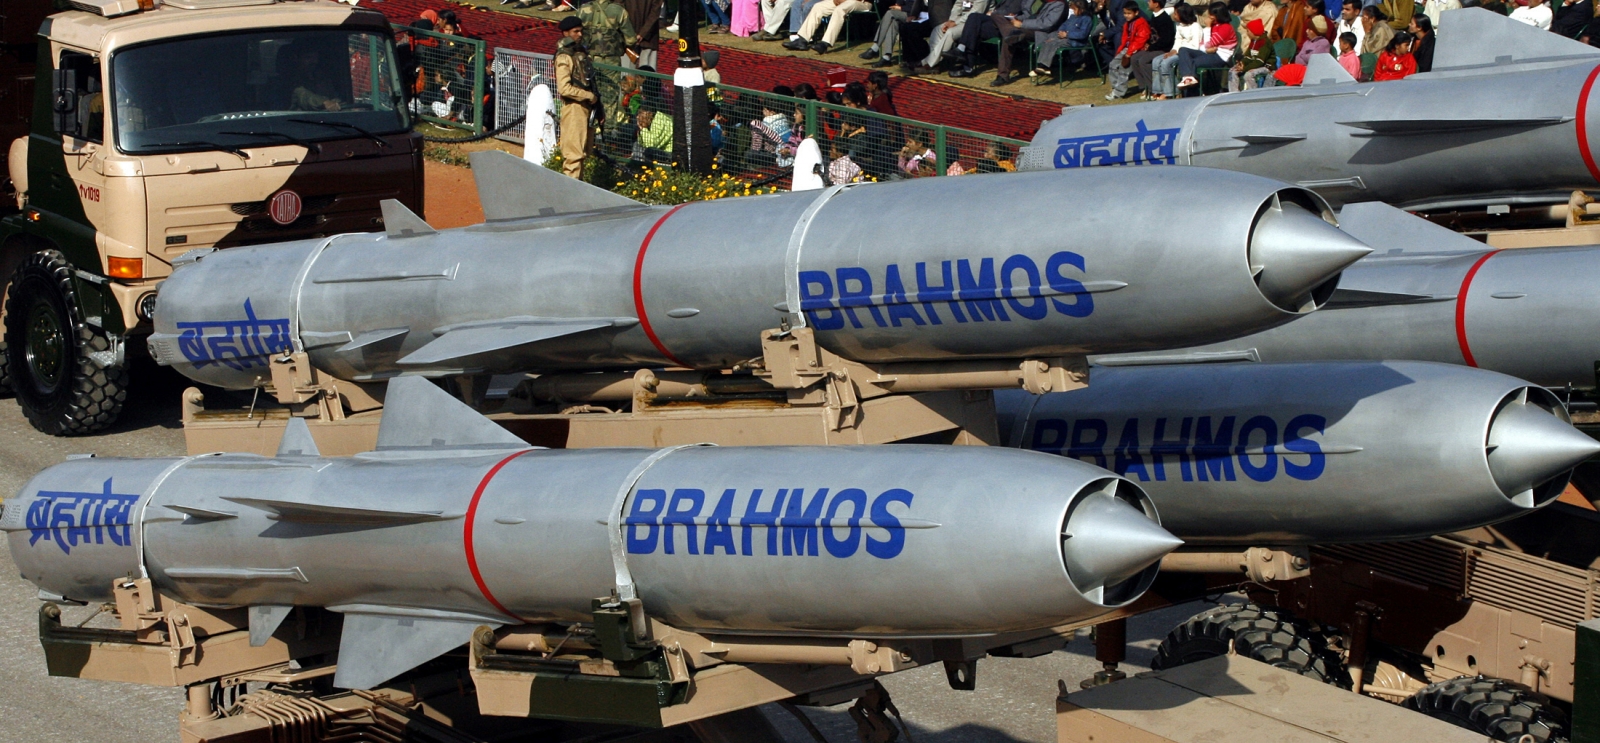 BrahMos,BrahMos missile, BrahMos cruise missile, BrahMos missile details, BrahMos features, BrahMos India,India test fires BrahMos,DRDO,Brahmos test fired,indian army,national news